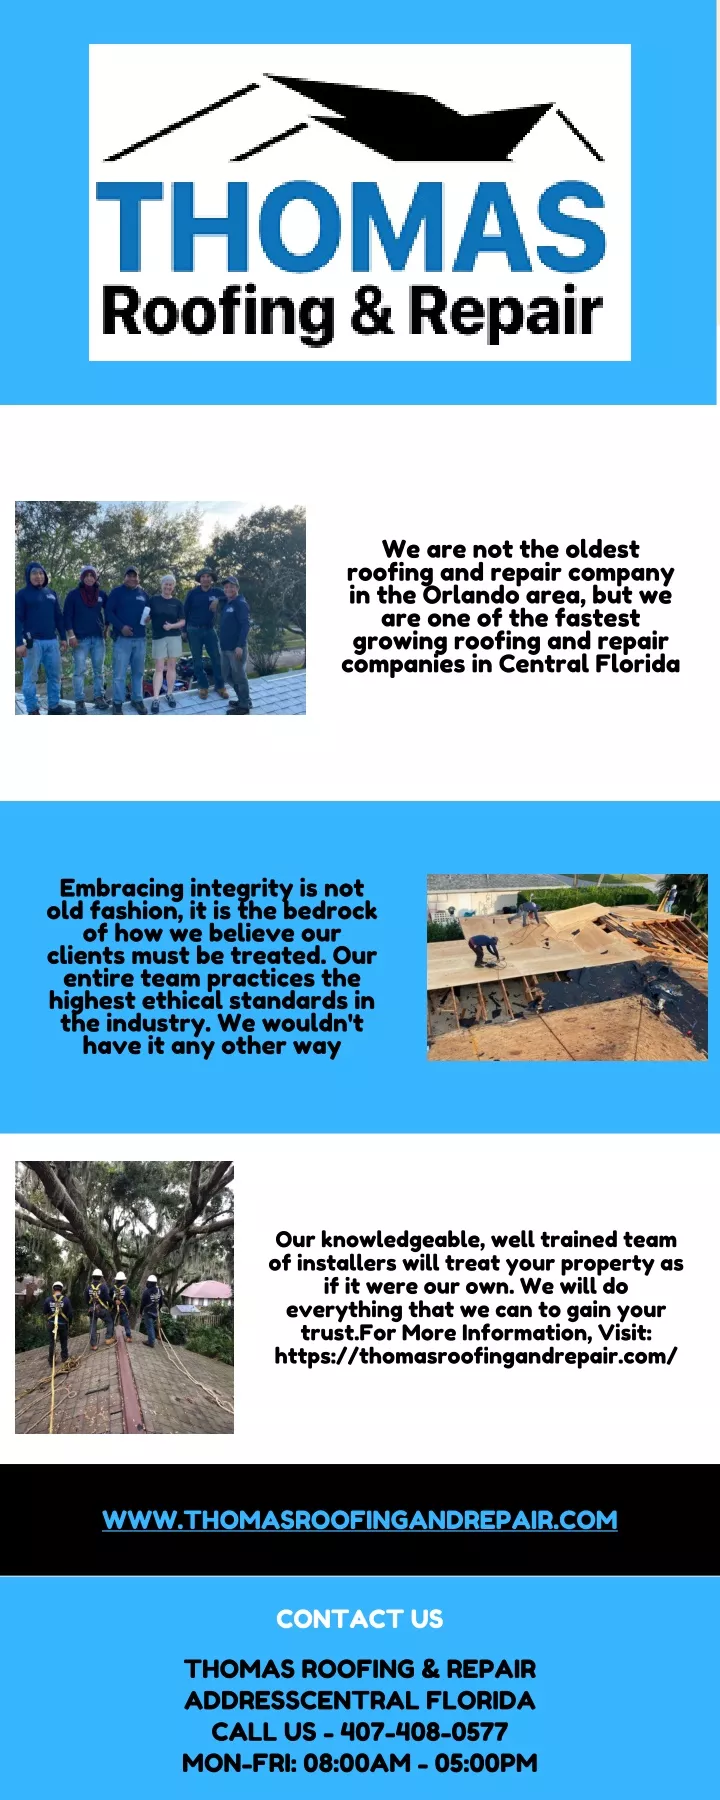 we are not the oldest roofing and repair company